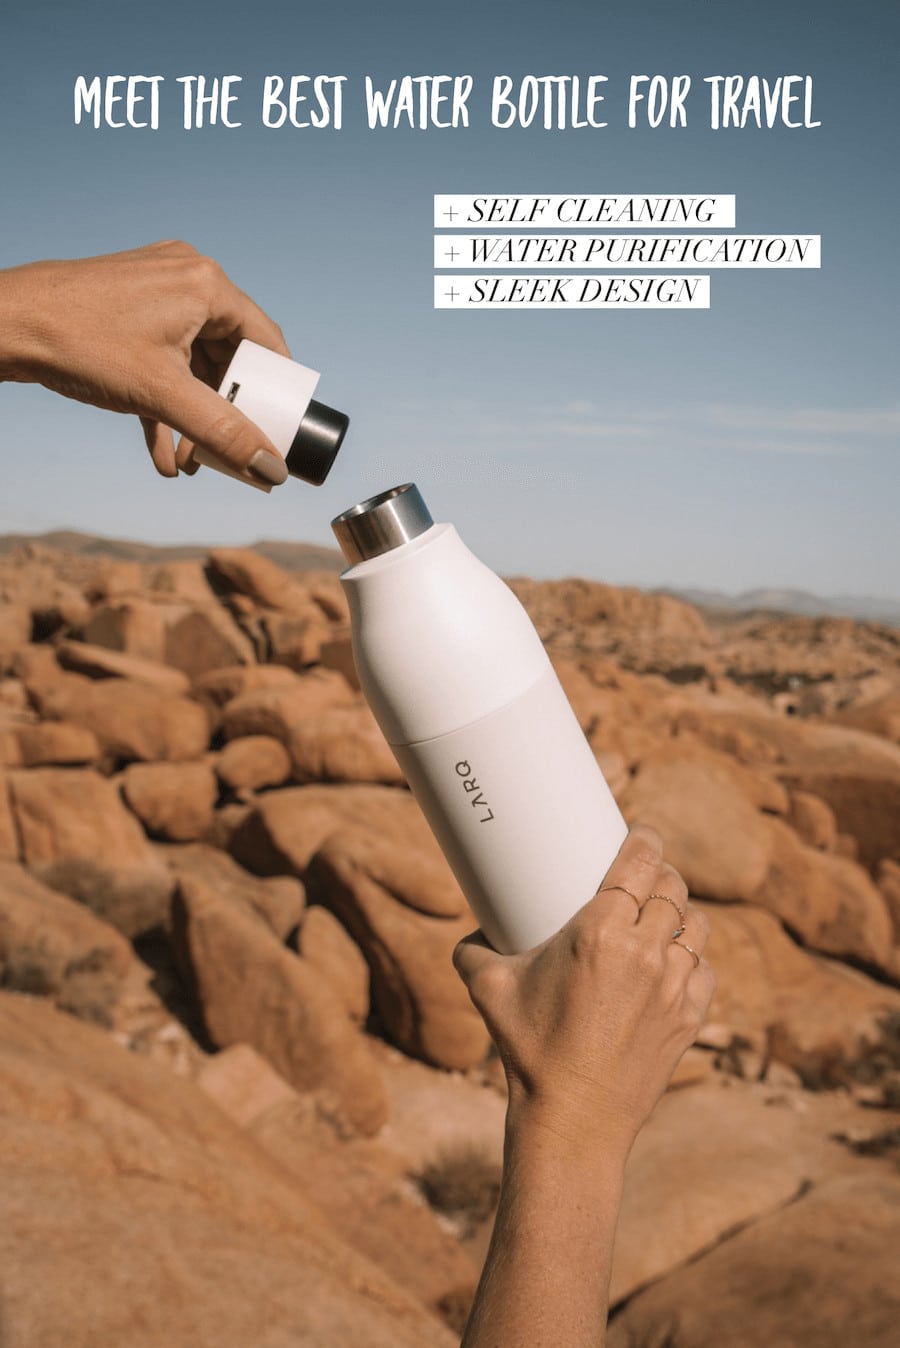 The Best Water Bottle For Travel That Cleans Itself! - Live Like It's the  Weekend